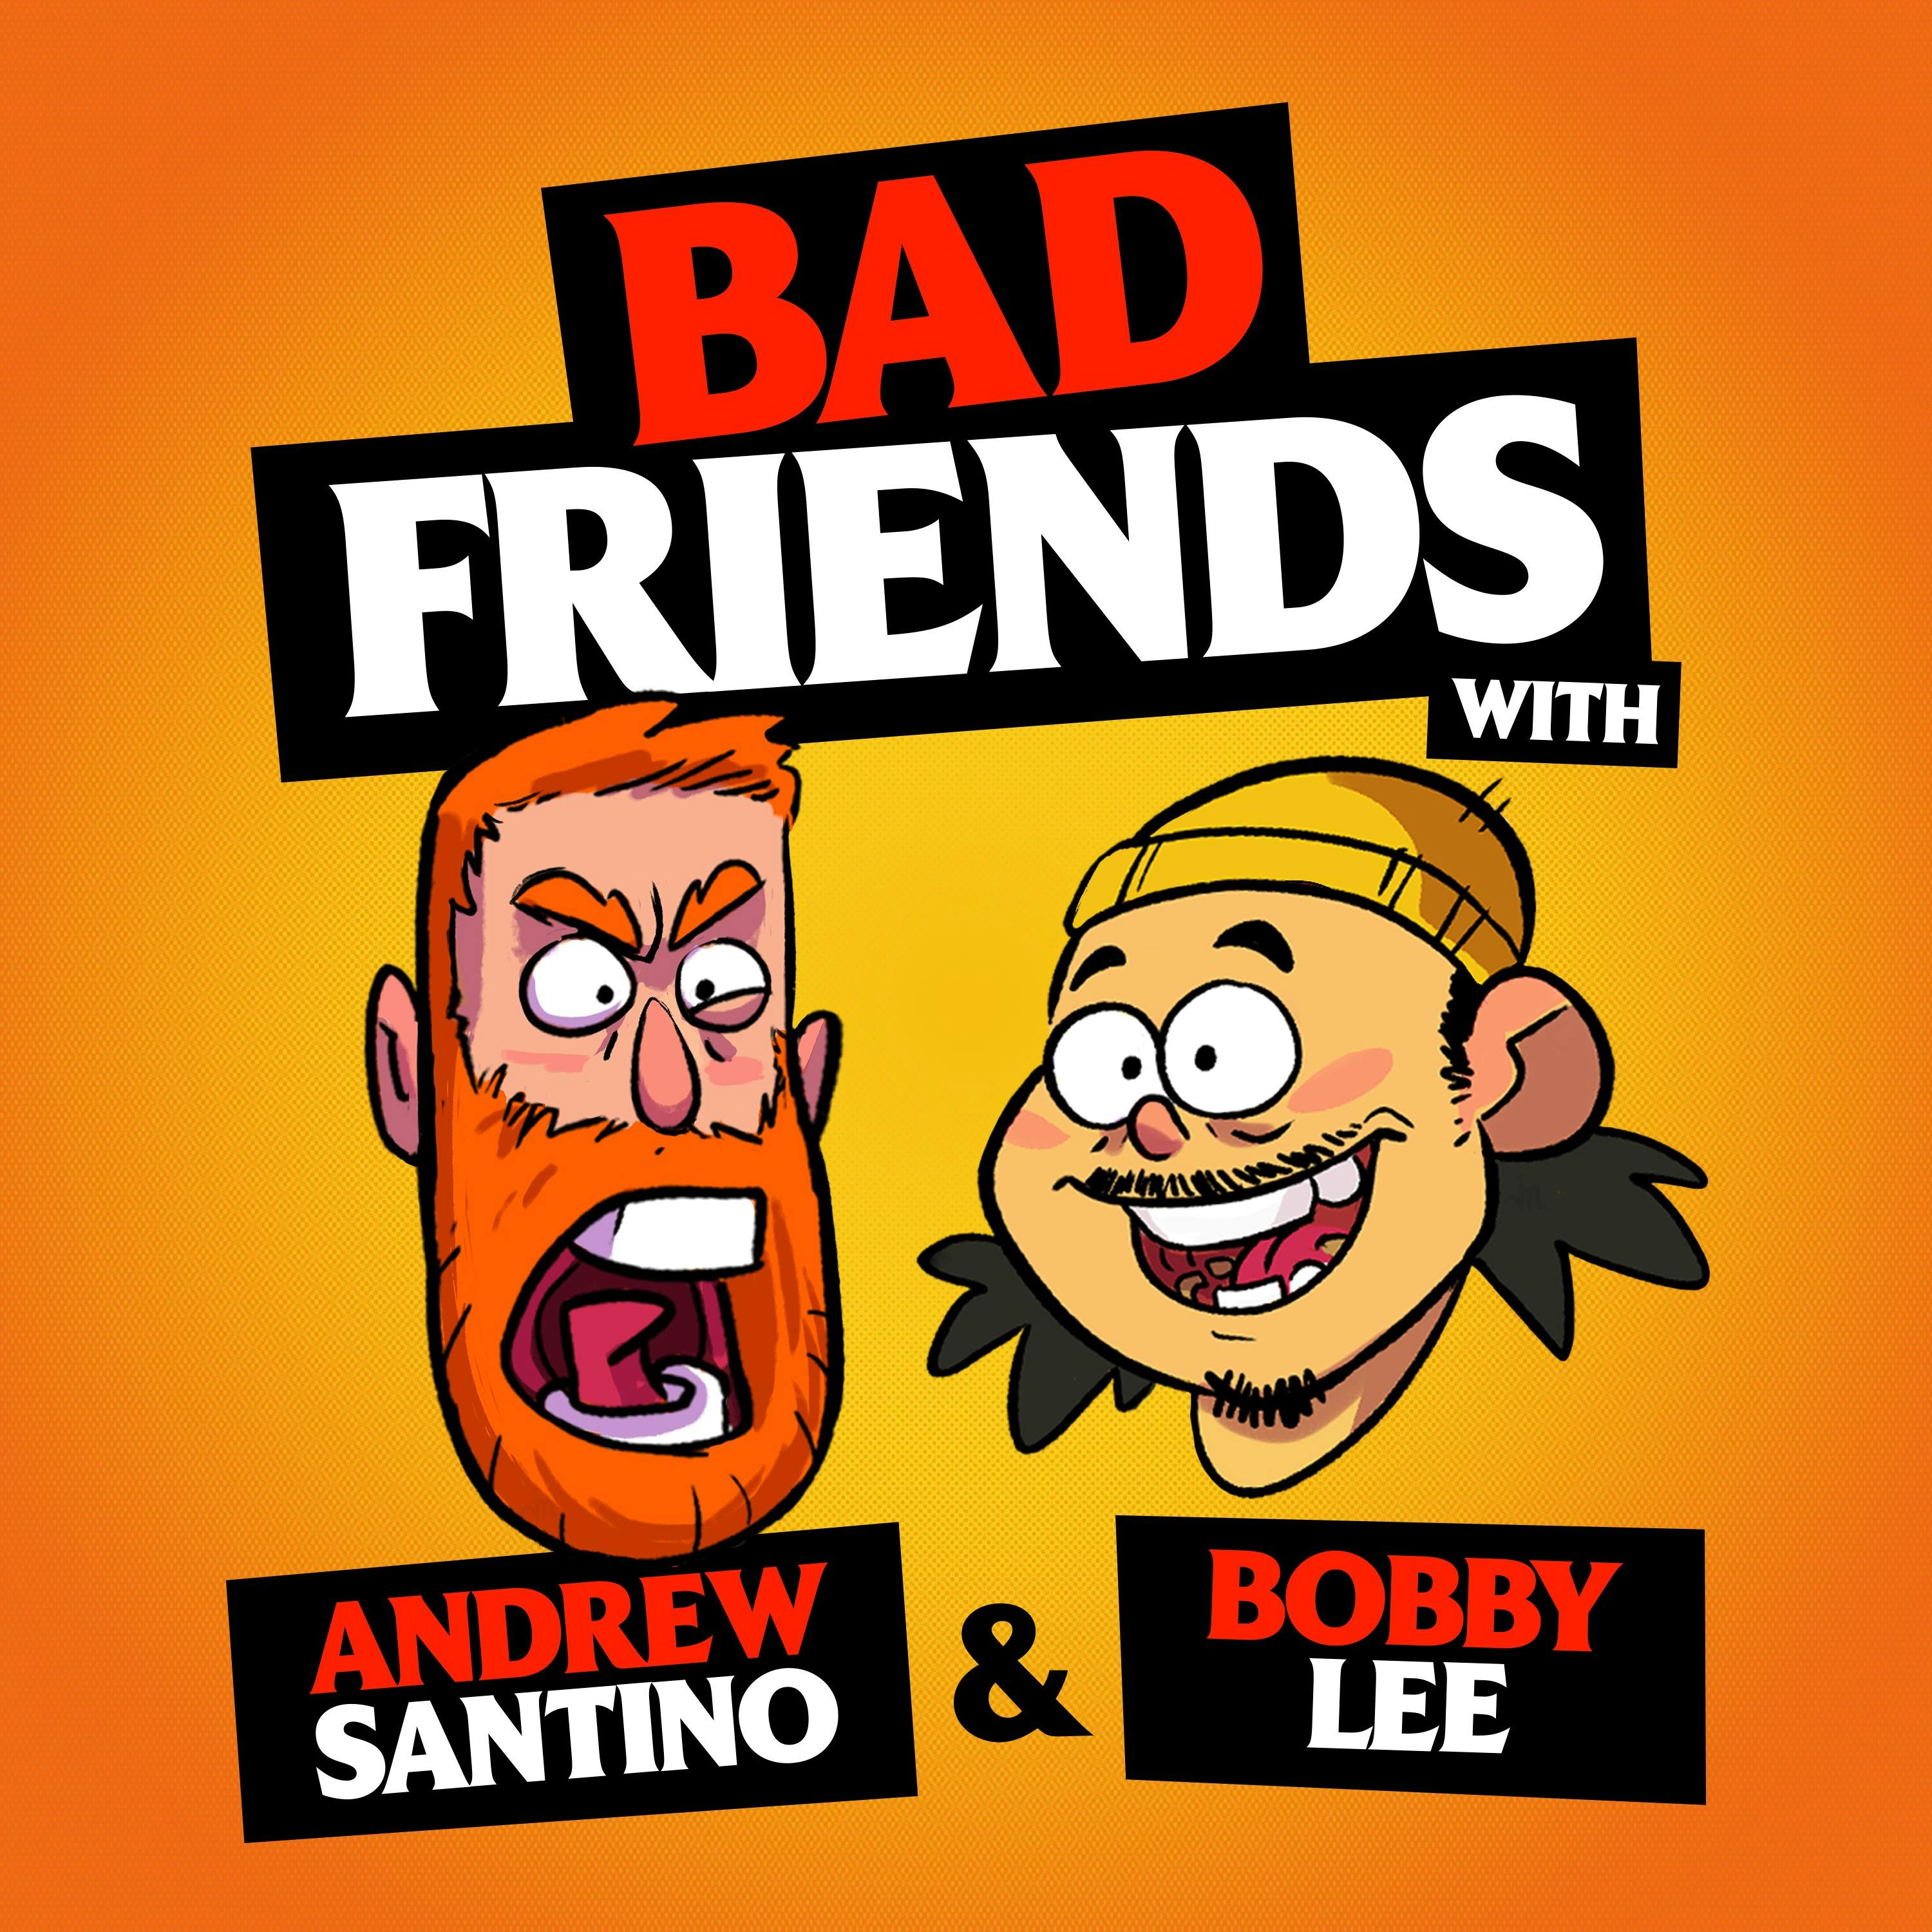 Call of Duty: Emotional Warfare by Andrew Santino and Bobby Lee